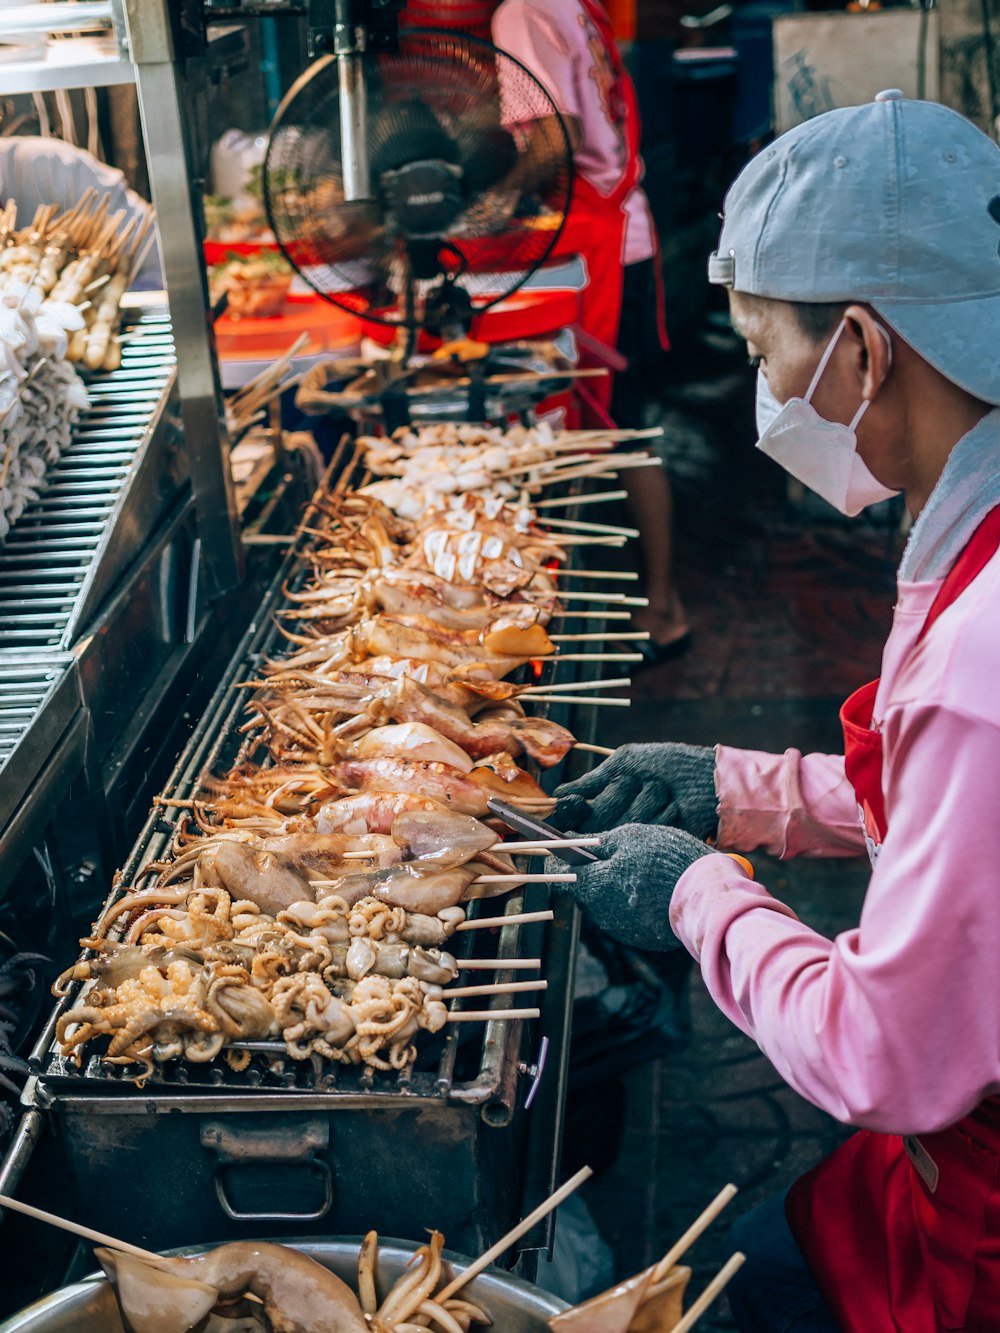 a person wearing a mask cooking food on a grill